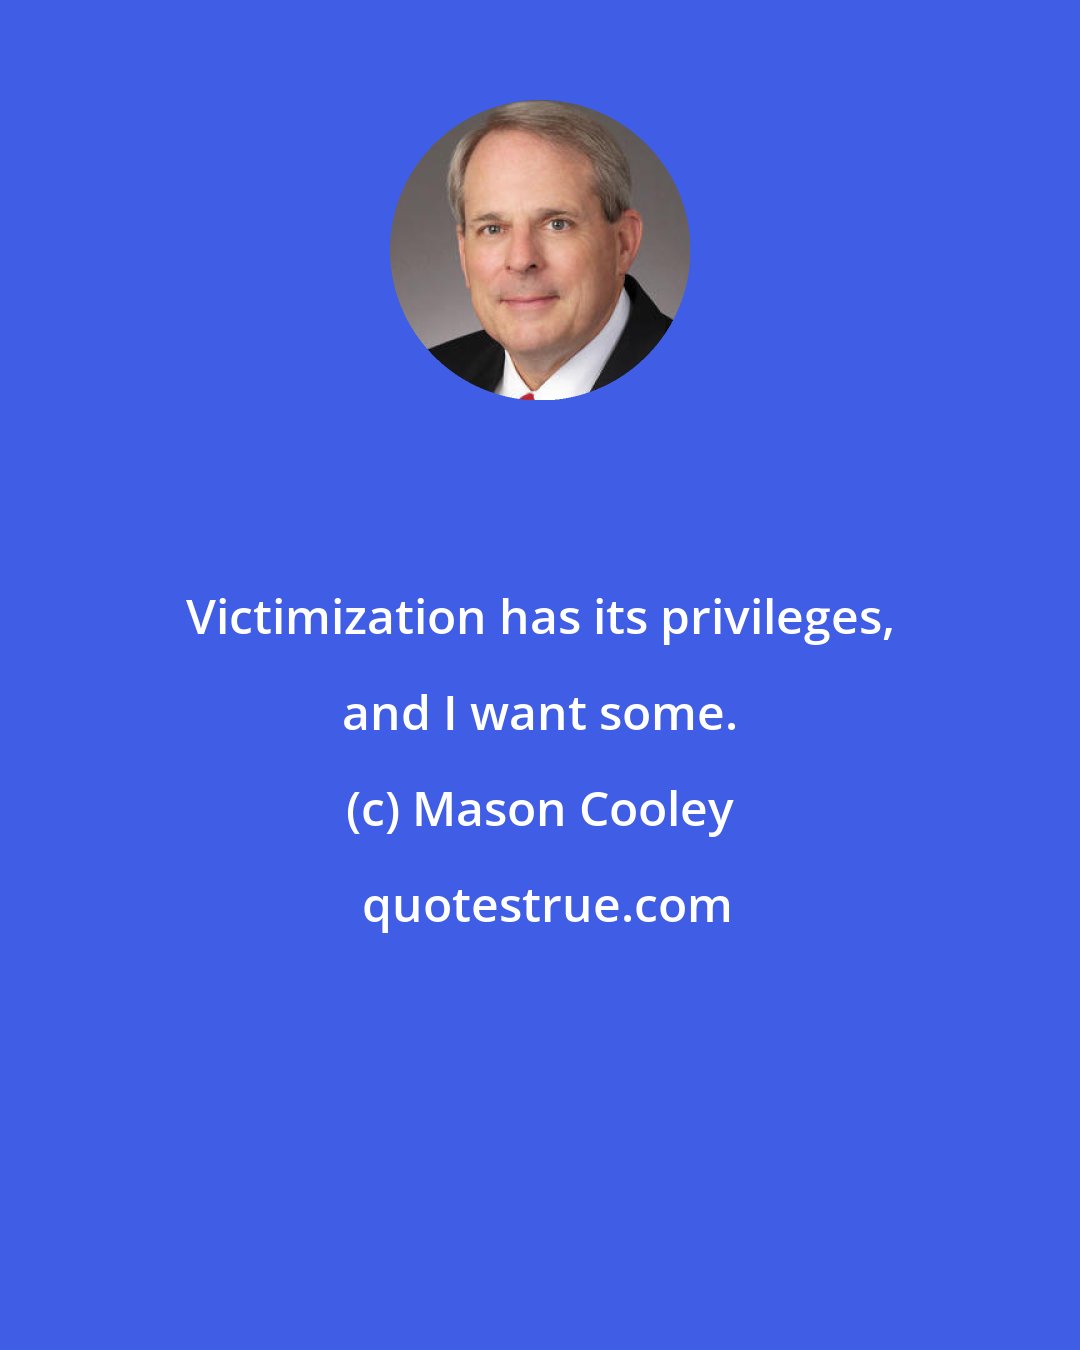 Mason Cooley: Victimization has its privileges, and I want some.